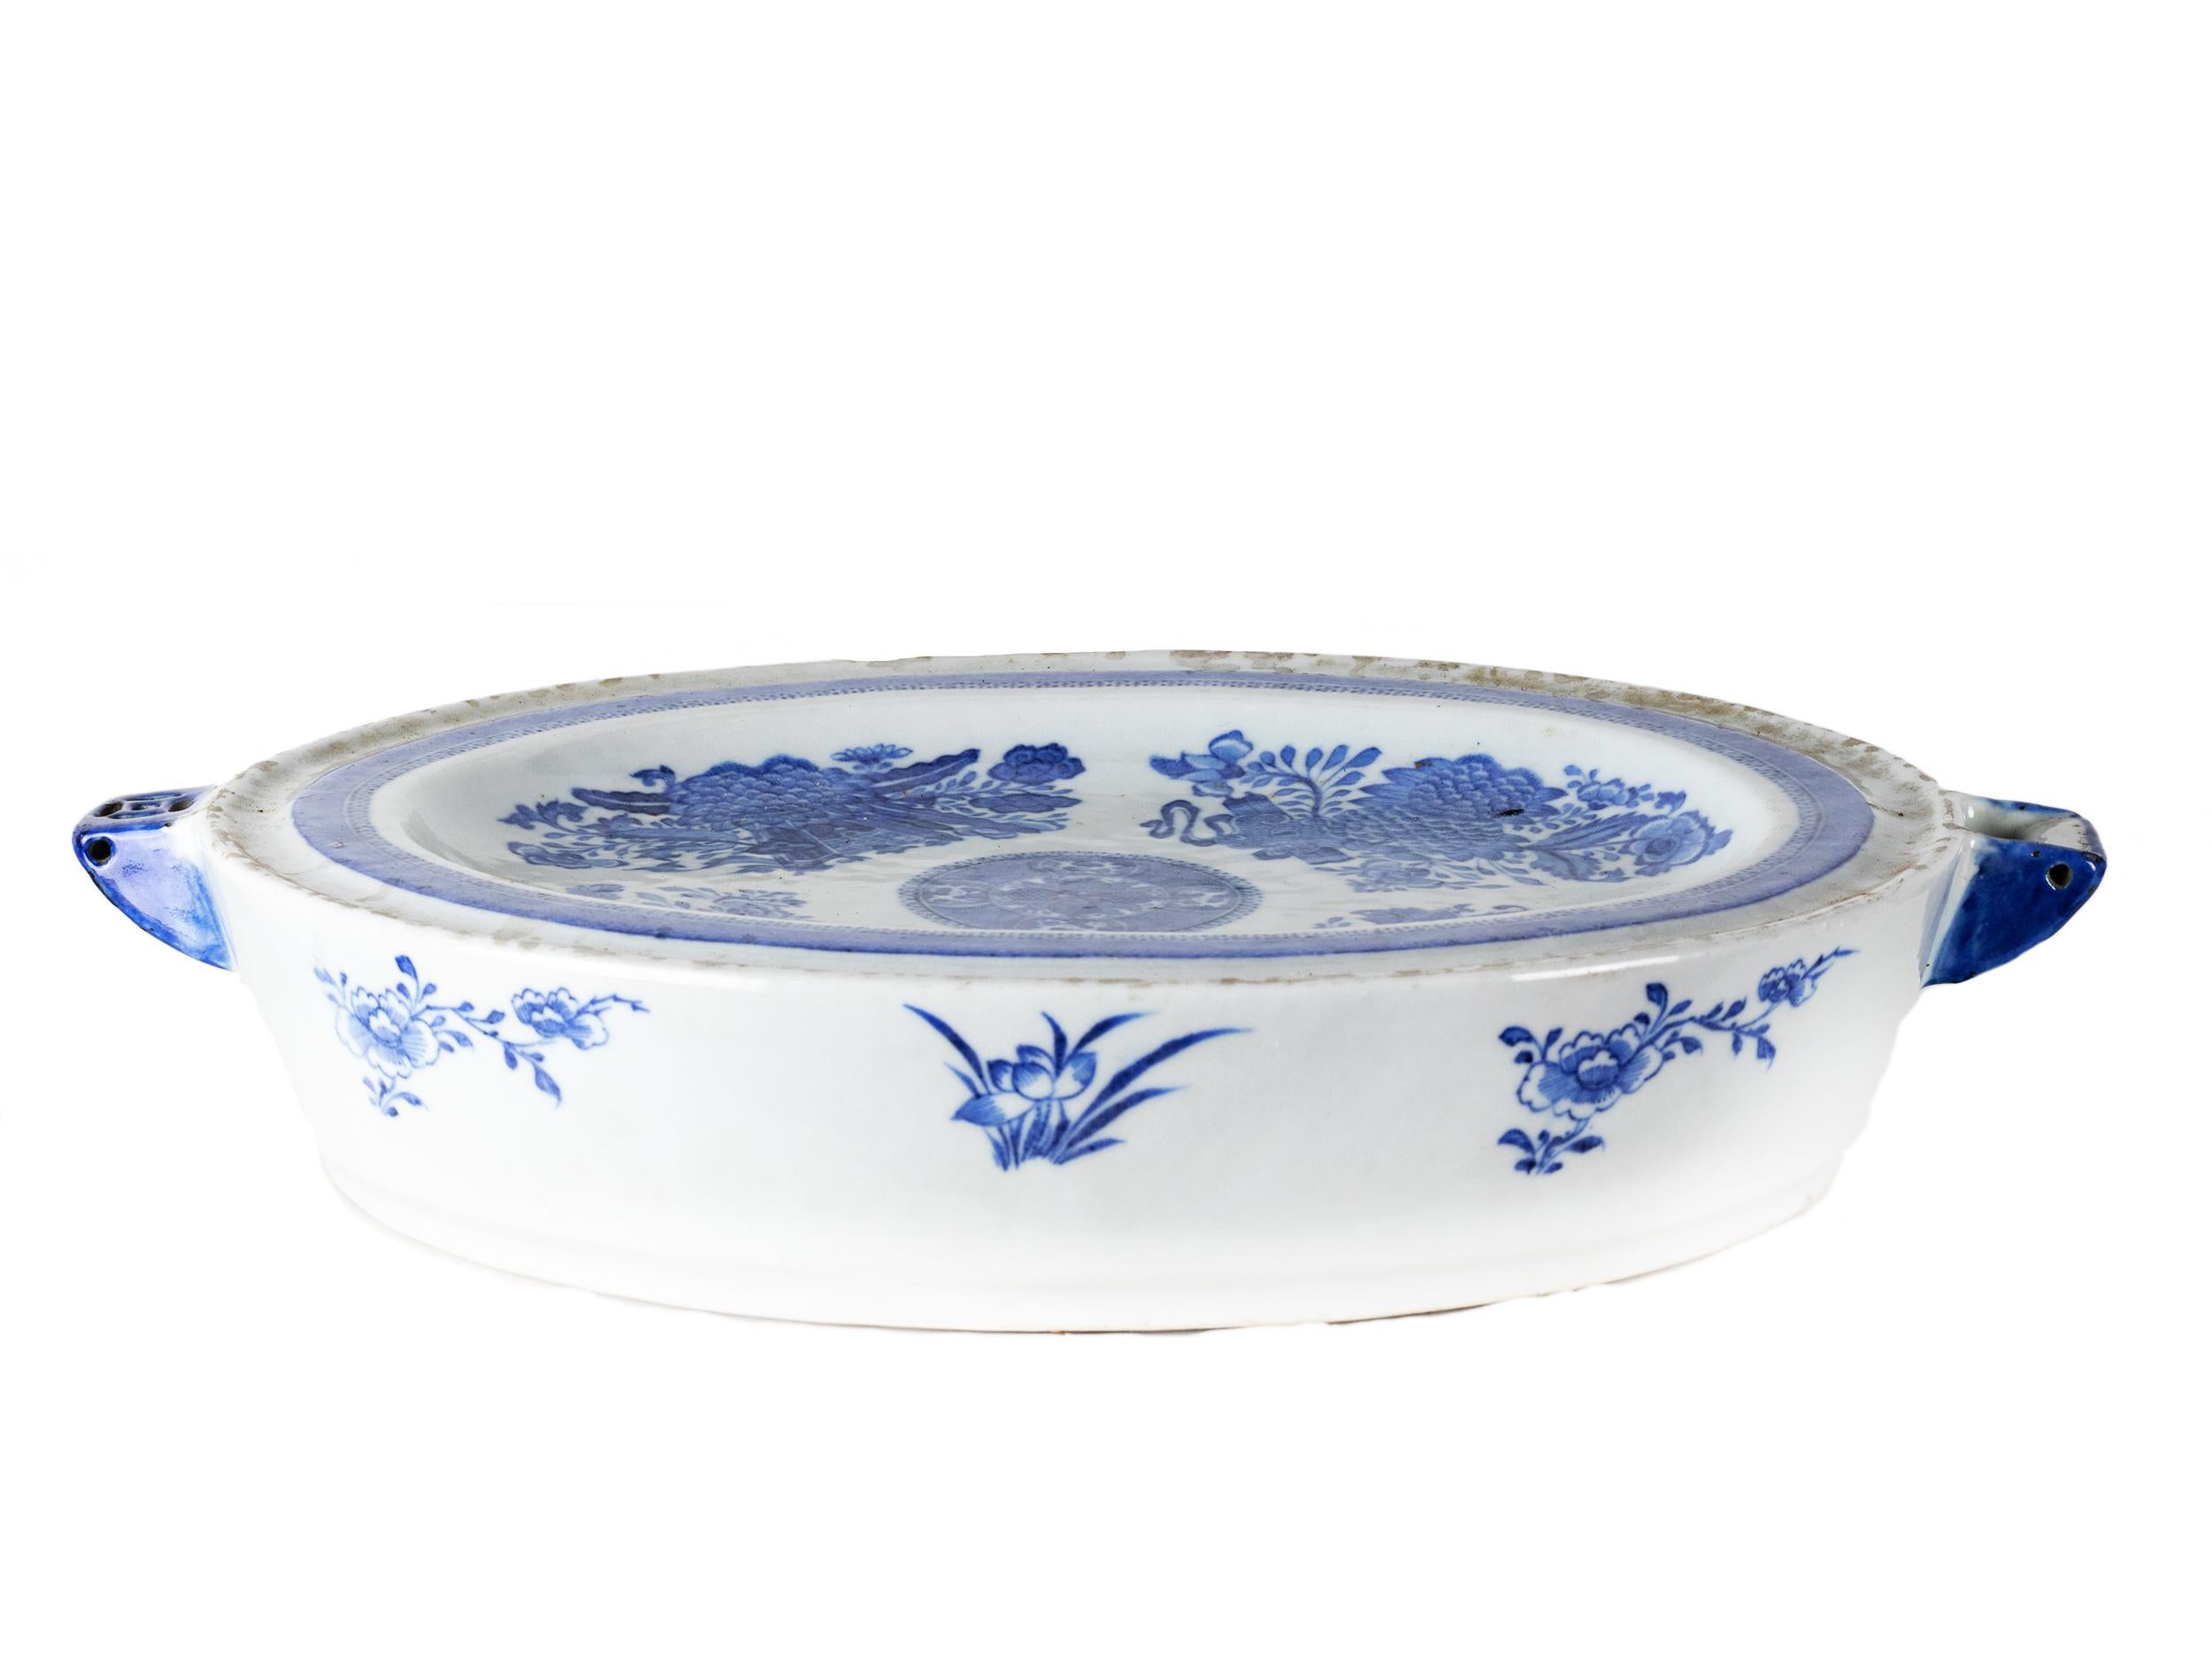 19th Century Chinese Blue And White Porcelain Covered Hot Water Serving Dish, circa 1800 For Sale